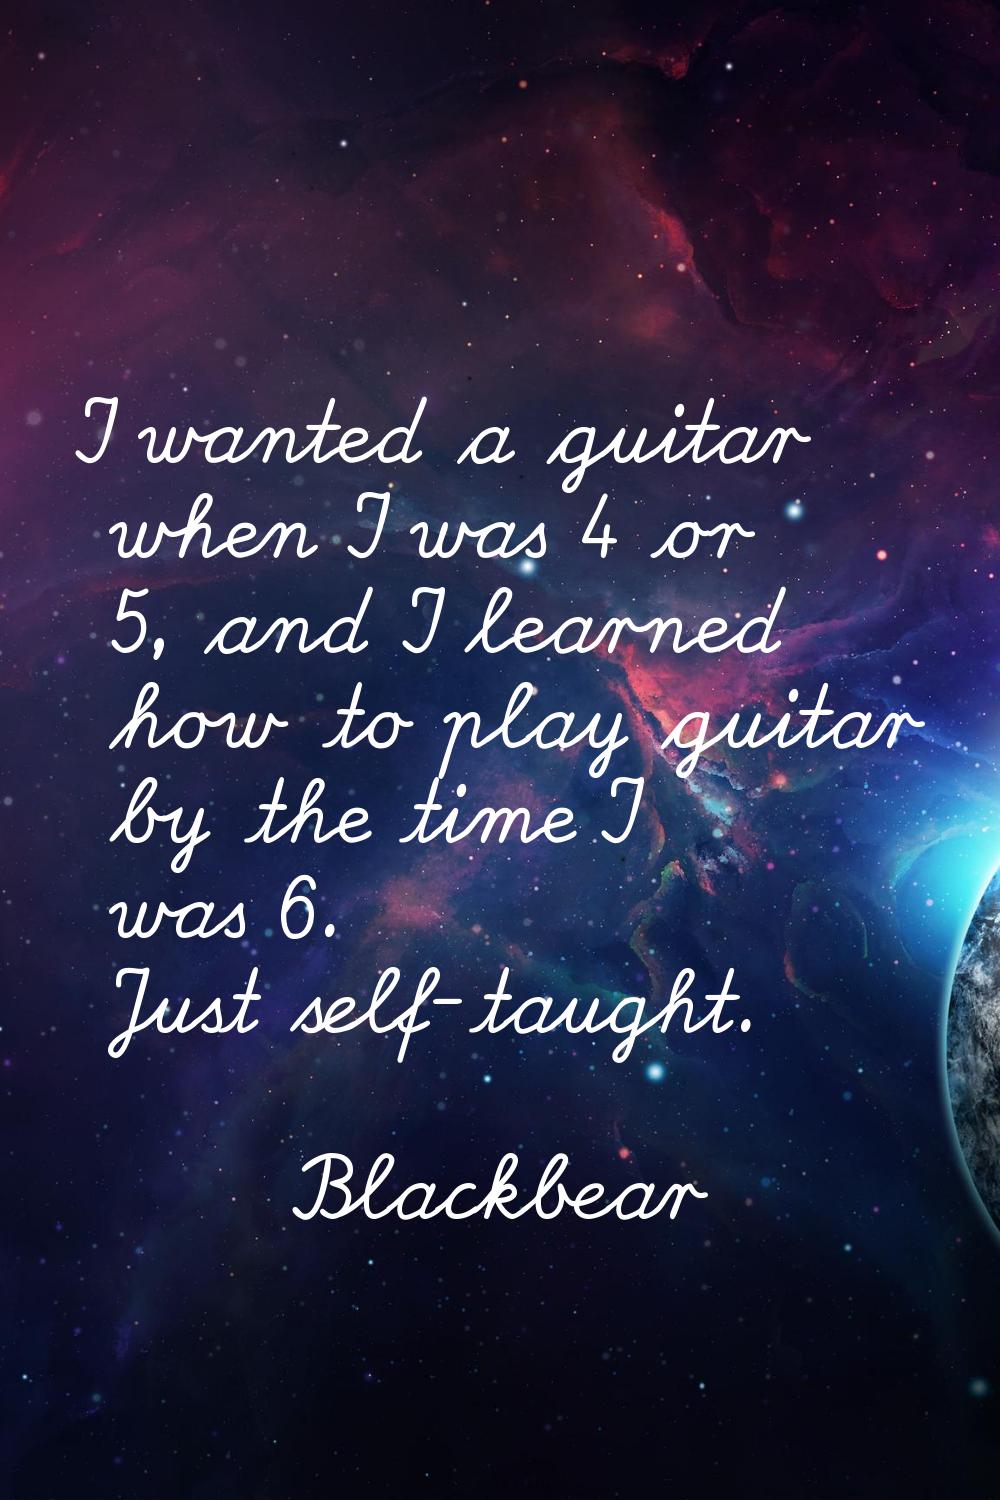 I wanted a guitar when I was 4 or 5, and I learned how to play guitar by the time I was 6. Just sel